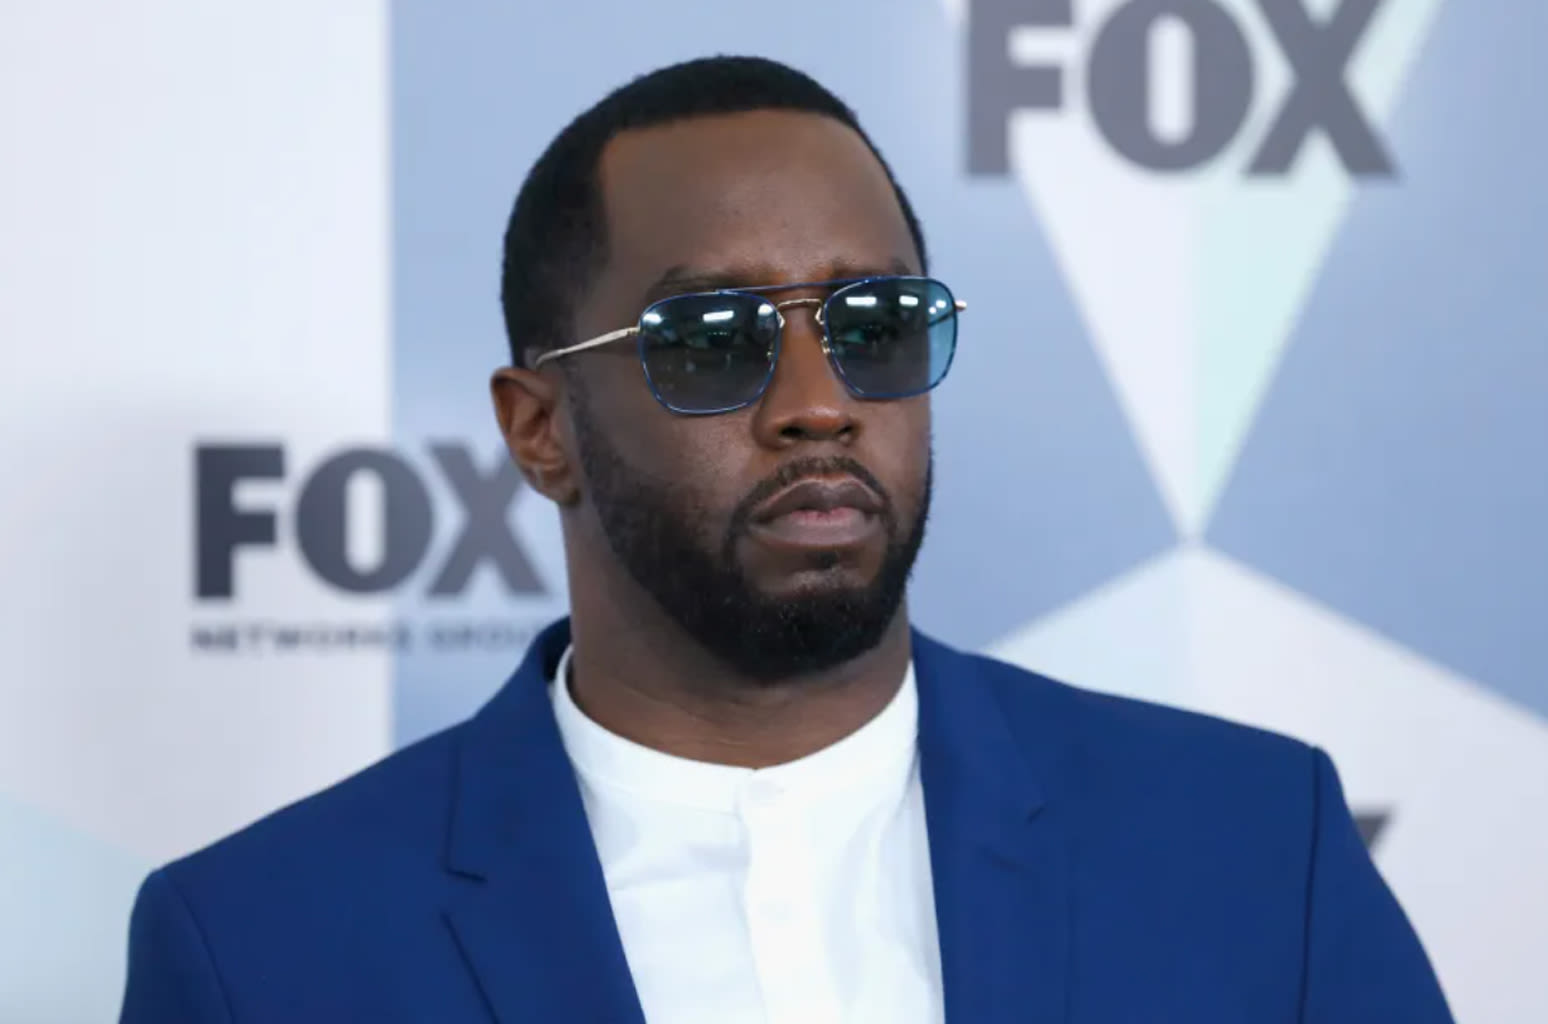 L.A. District Attorney Explains Why Diddy Can’t Be Prosecuted Over Cassie Ventura Hotel Video